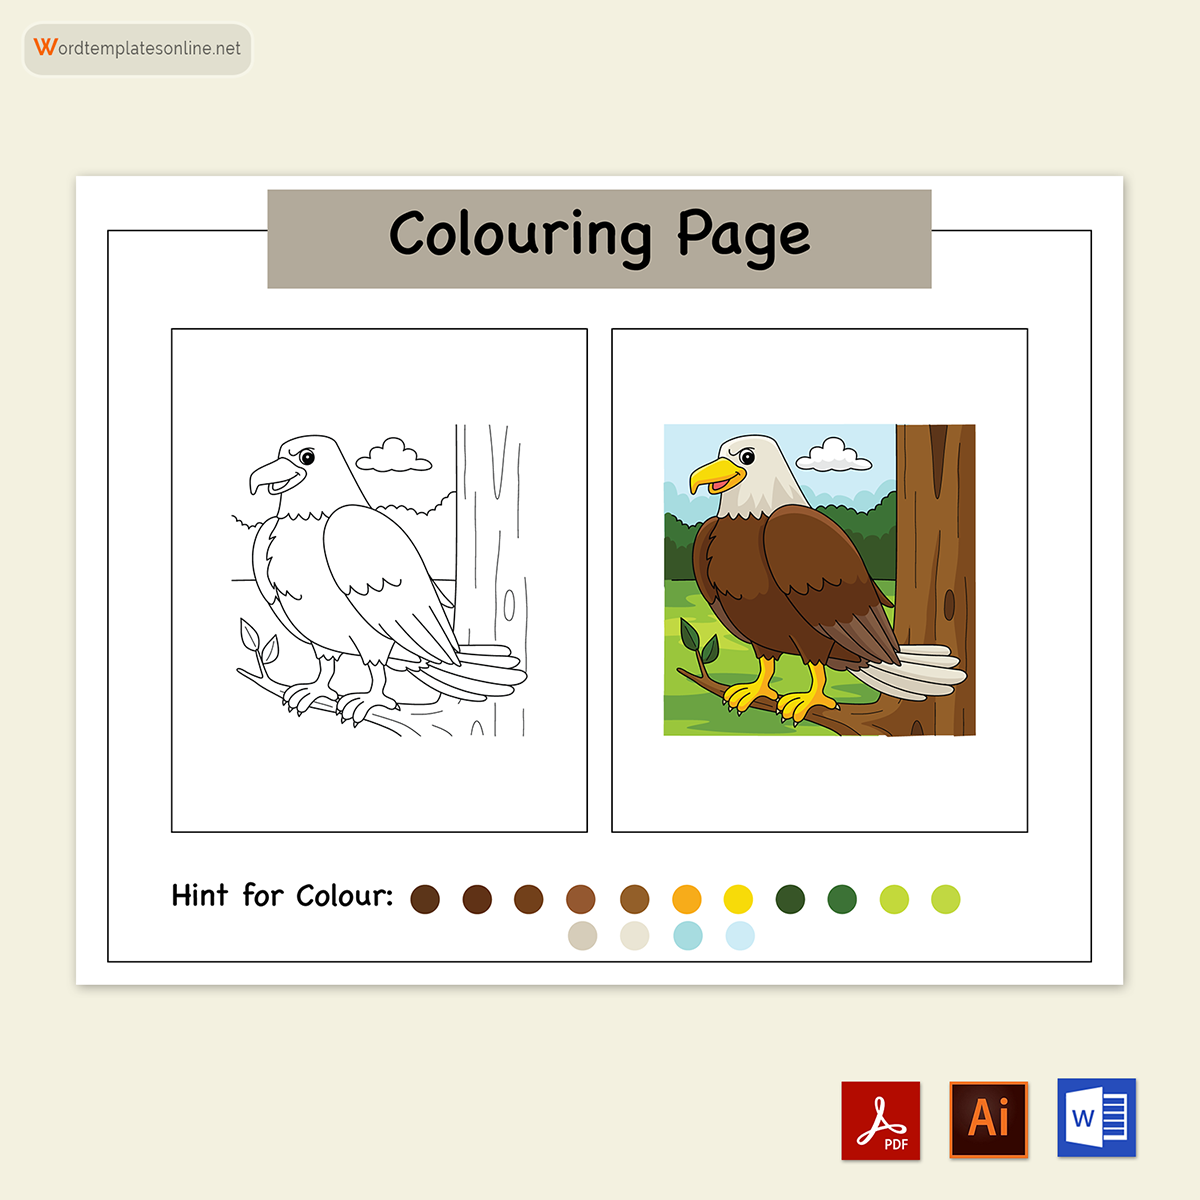 Coloring pages of animals